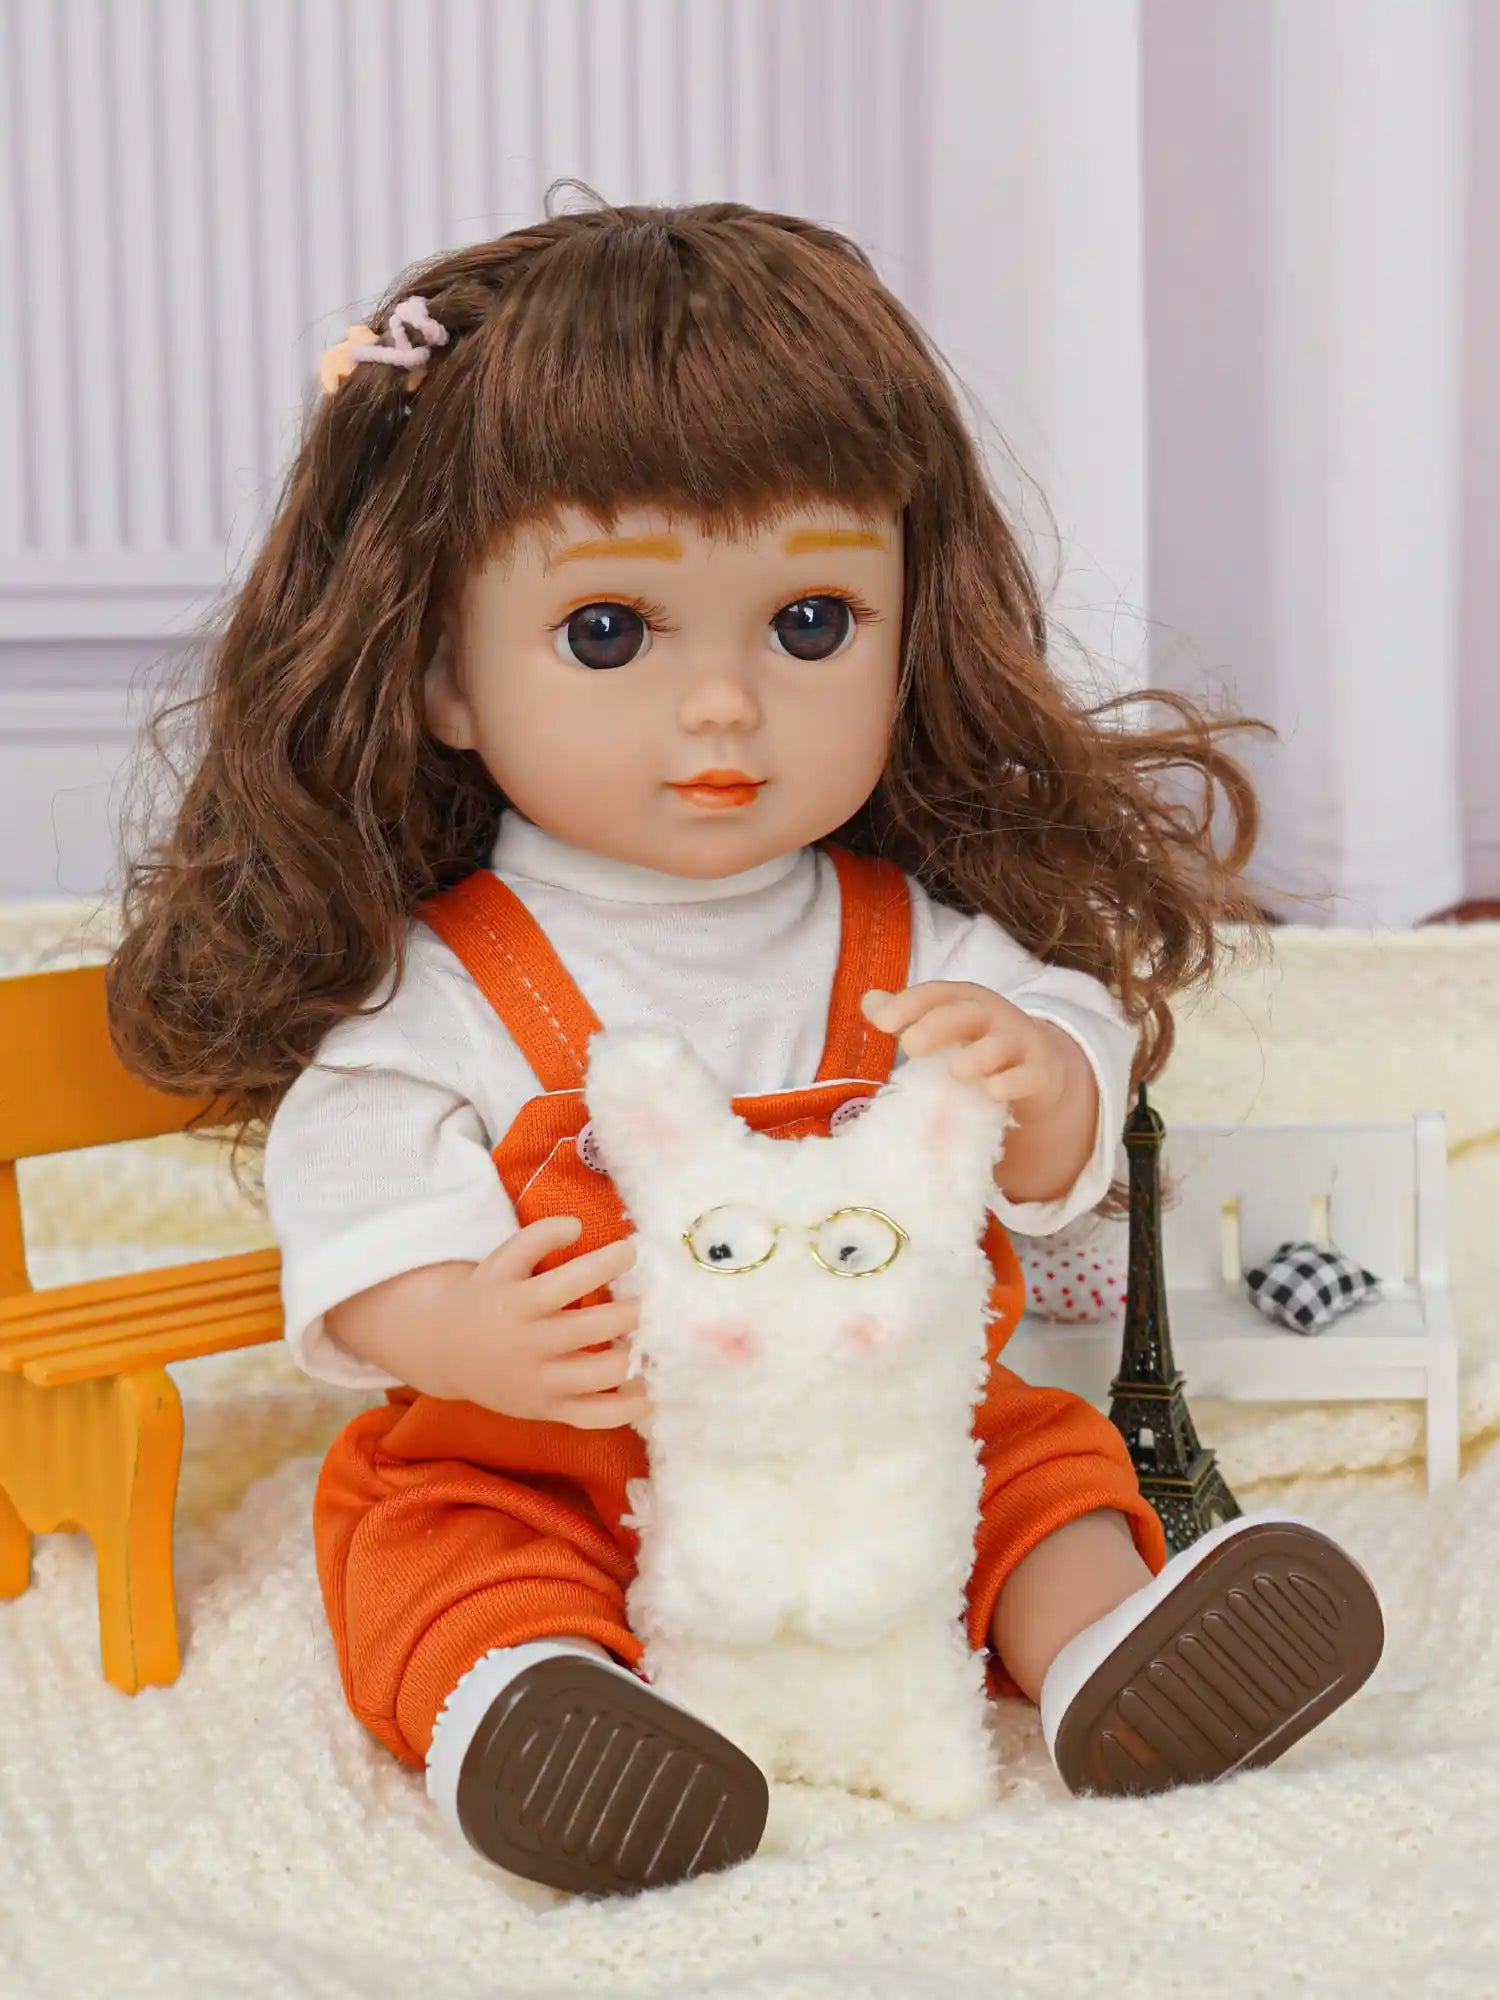 Doll with curly brown hair in orange overalls, white shirt, with plush dog and Eiffel Tower.